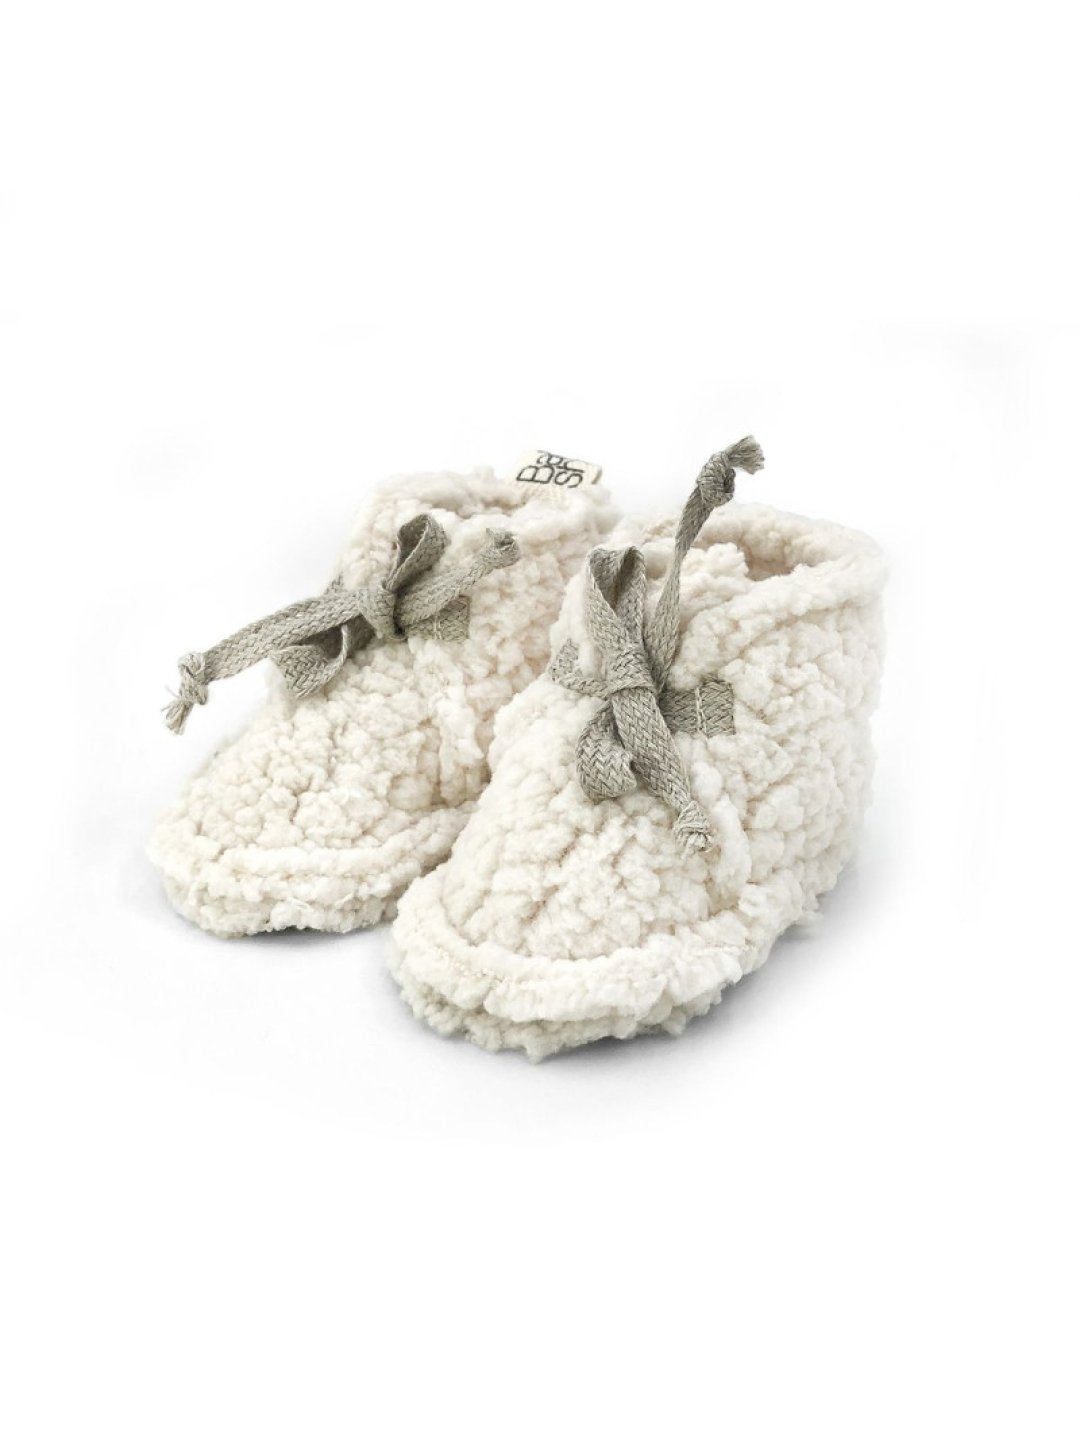 Chaussons polaires mouton - BABYSHOWER